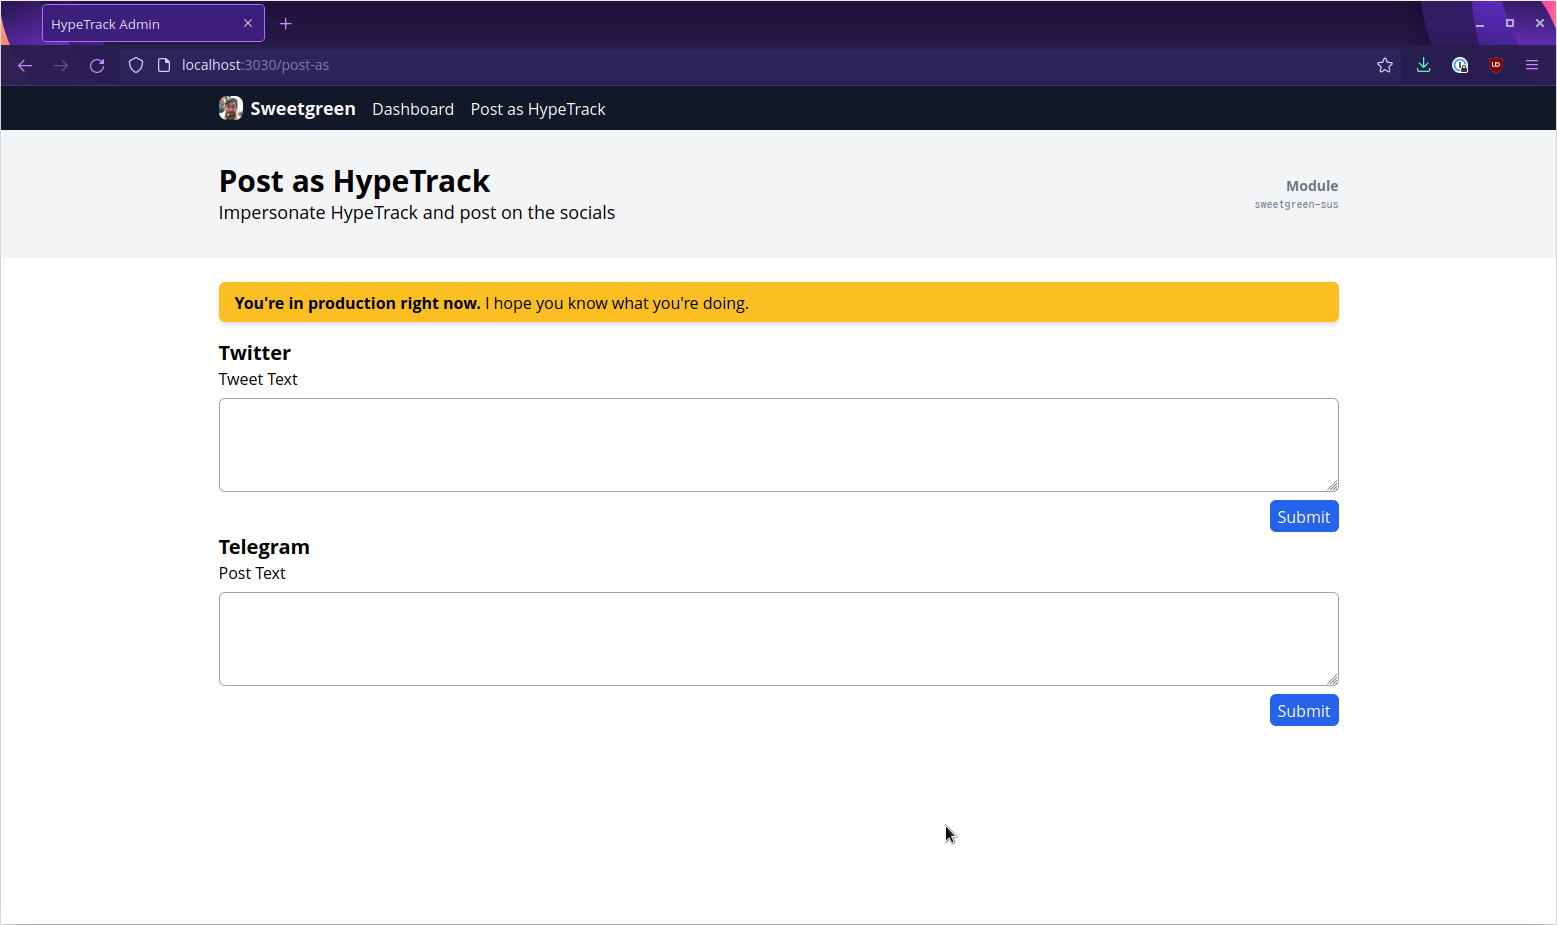 A photo of the admin interface for HypeTrack, Sweetgreen. The image shows the interface which allows an operator to post to social media as HypeTrack.